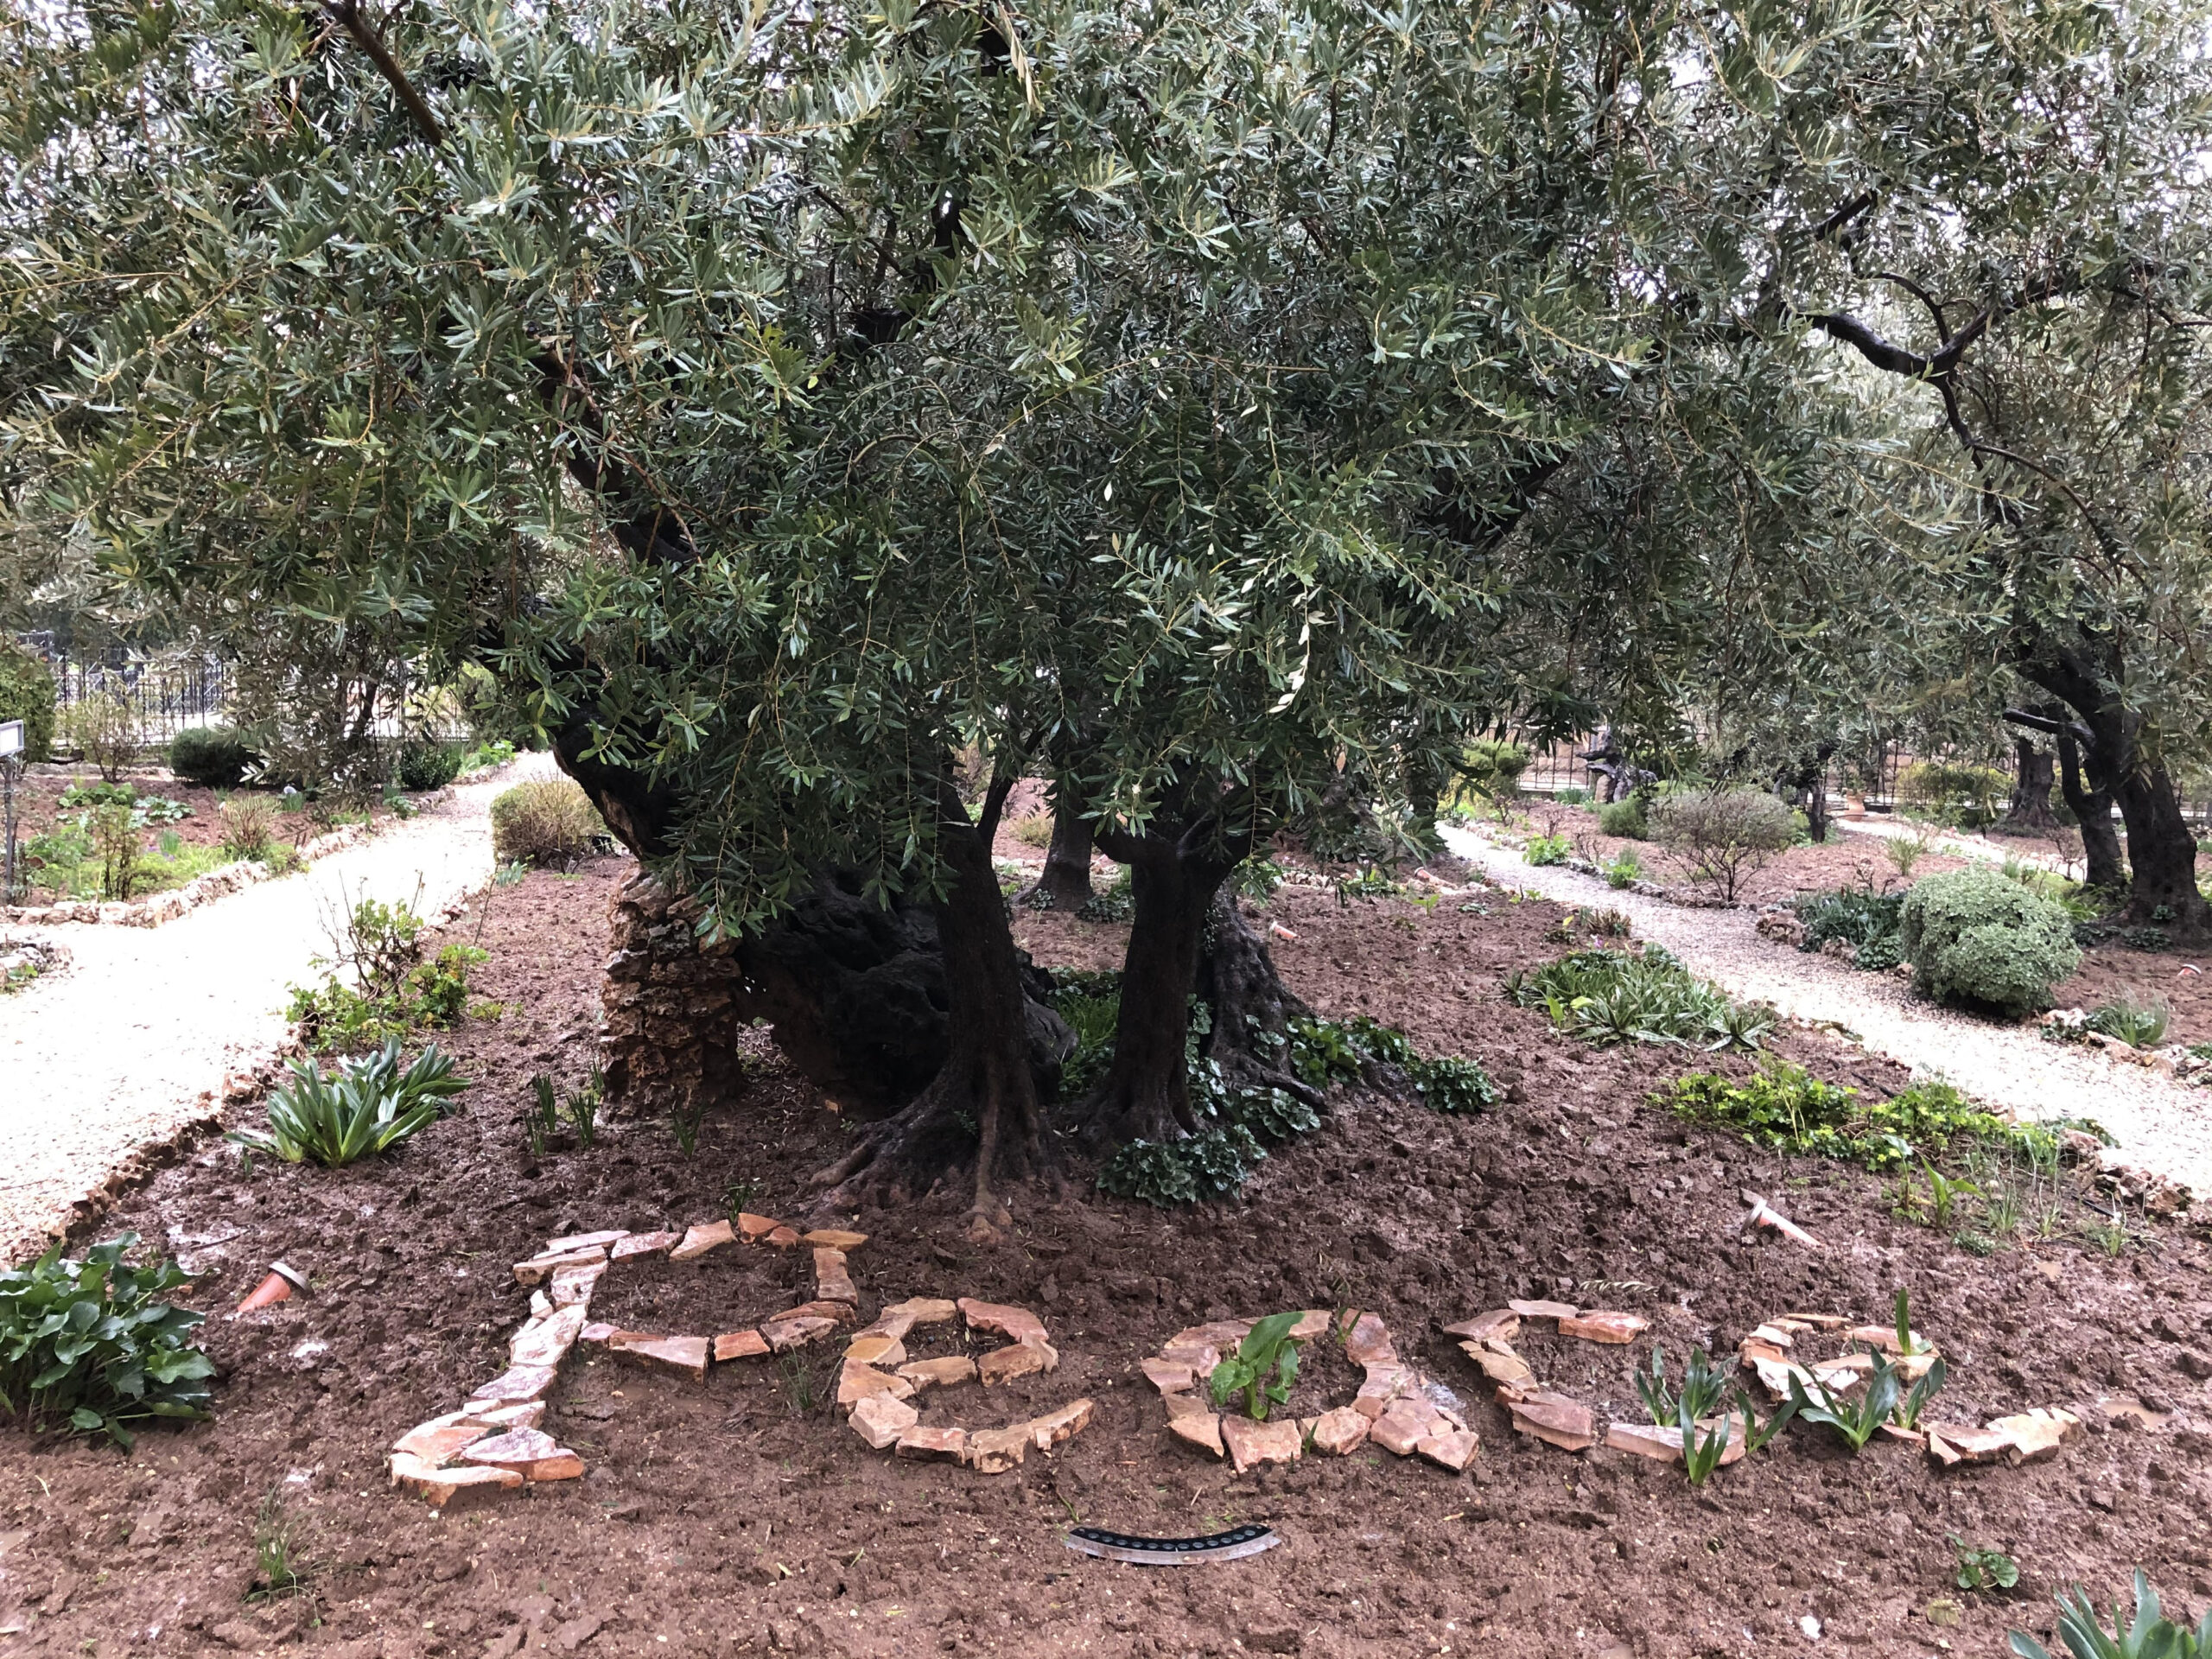 One of the ancient olive trees in the Garden of Gethsemane